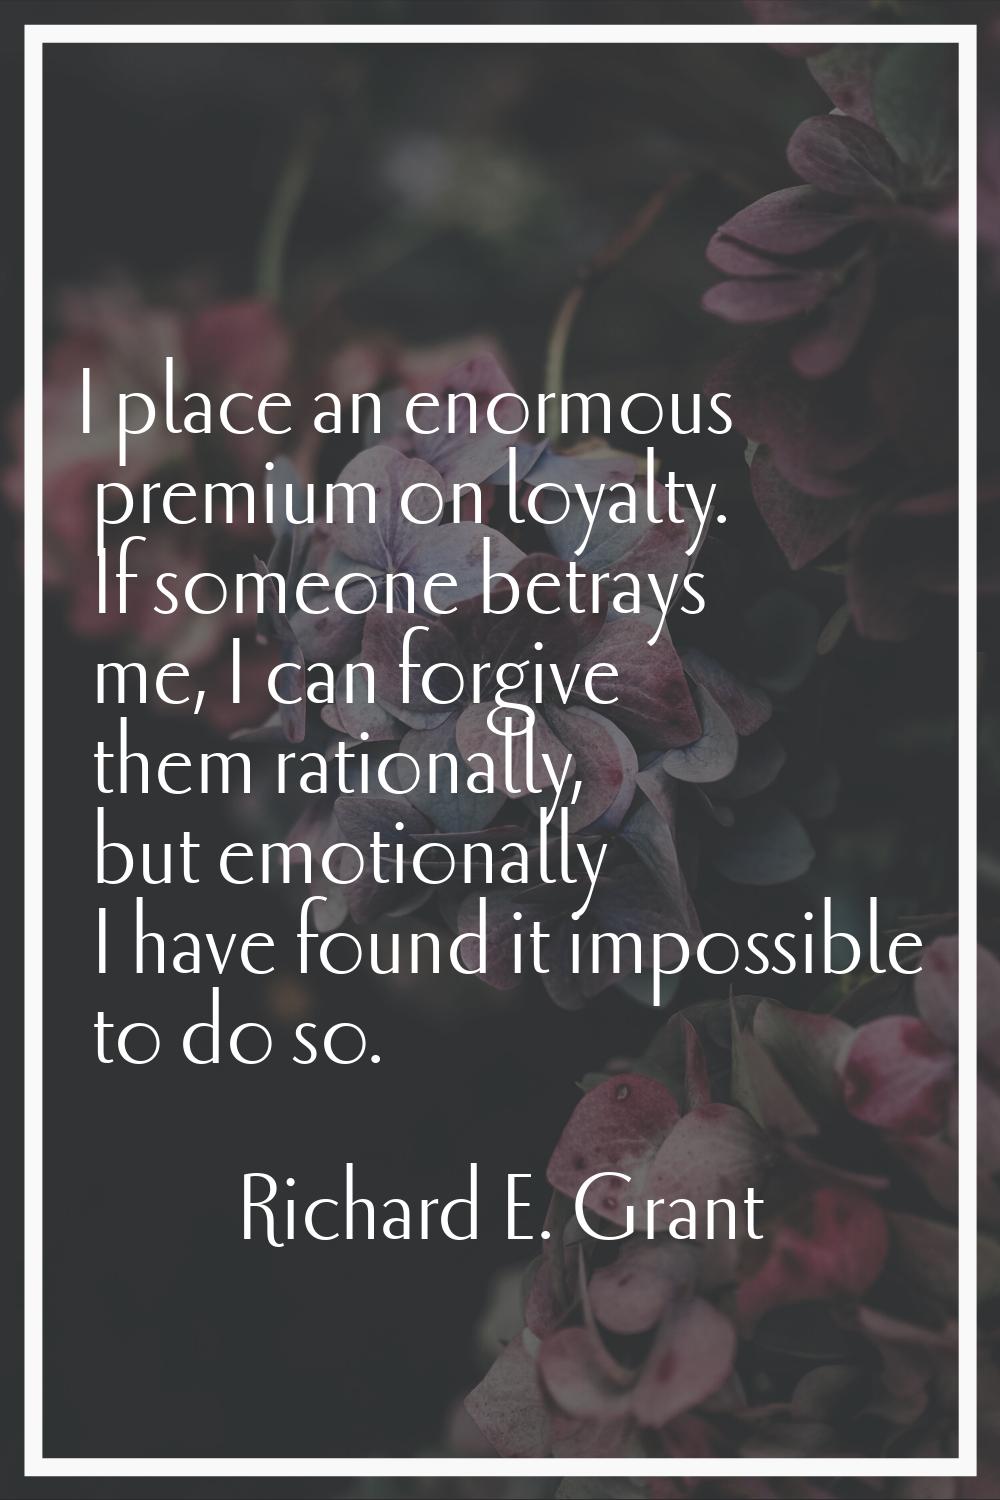 I place an enormous premium on loyalty. If someone betrays me, I can forgive them rationally, but e